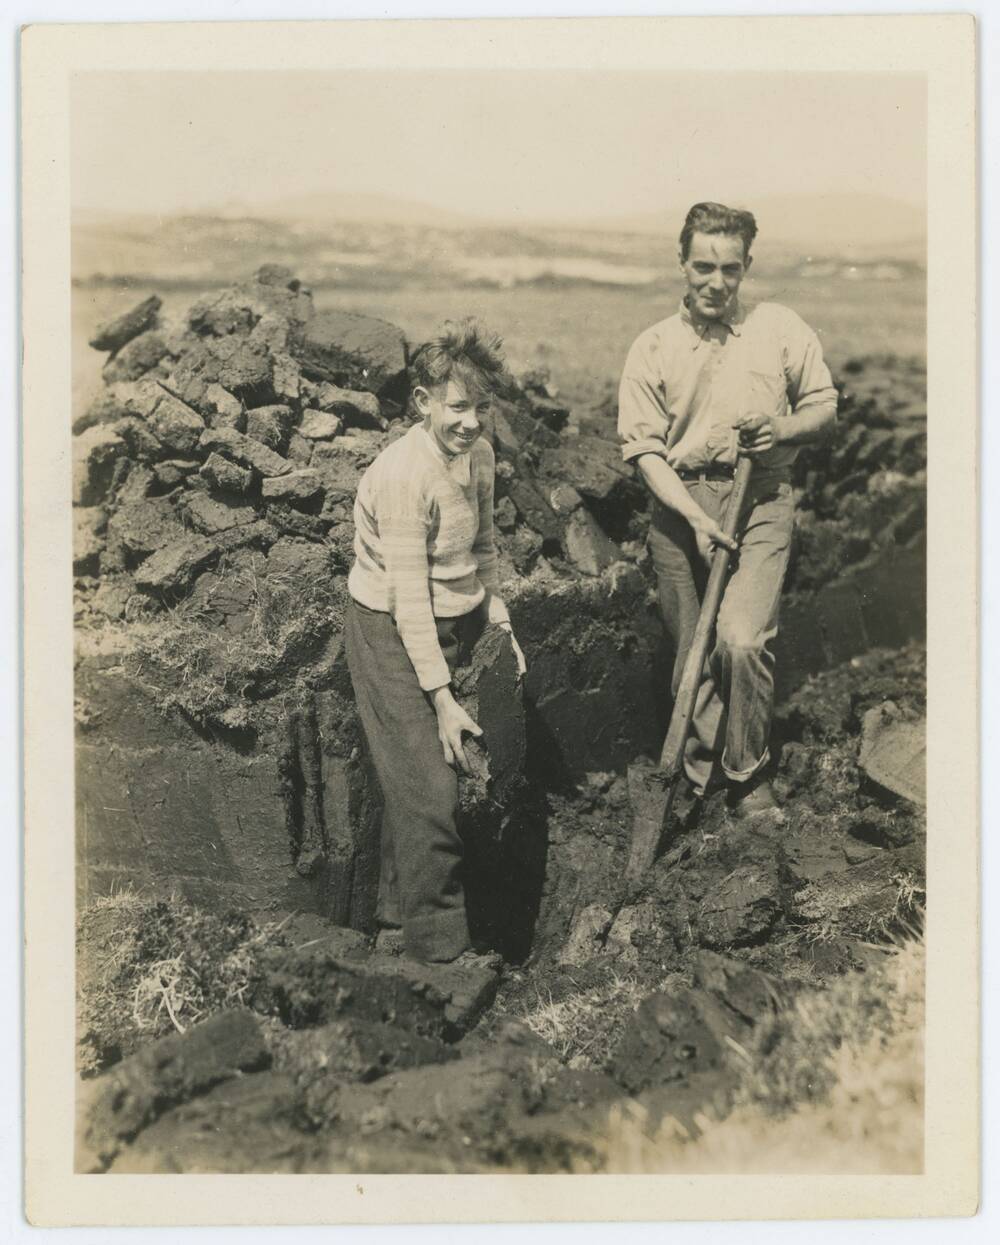 Black and white photograph of two mean cutting peat in a landscape.